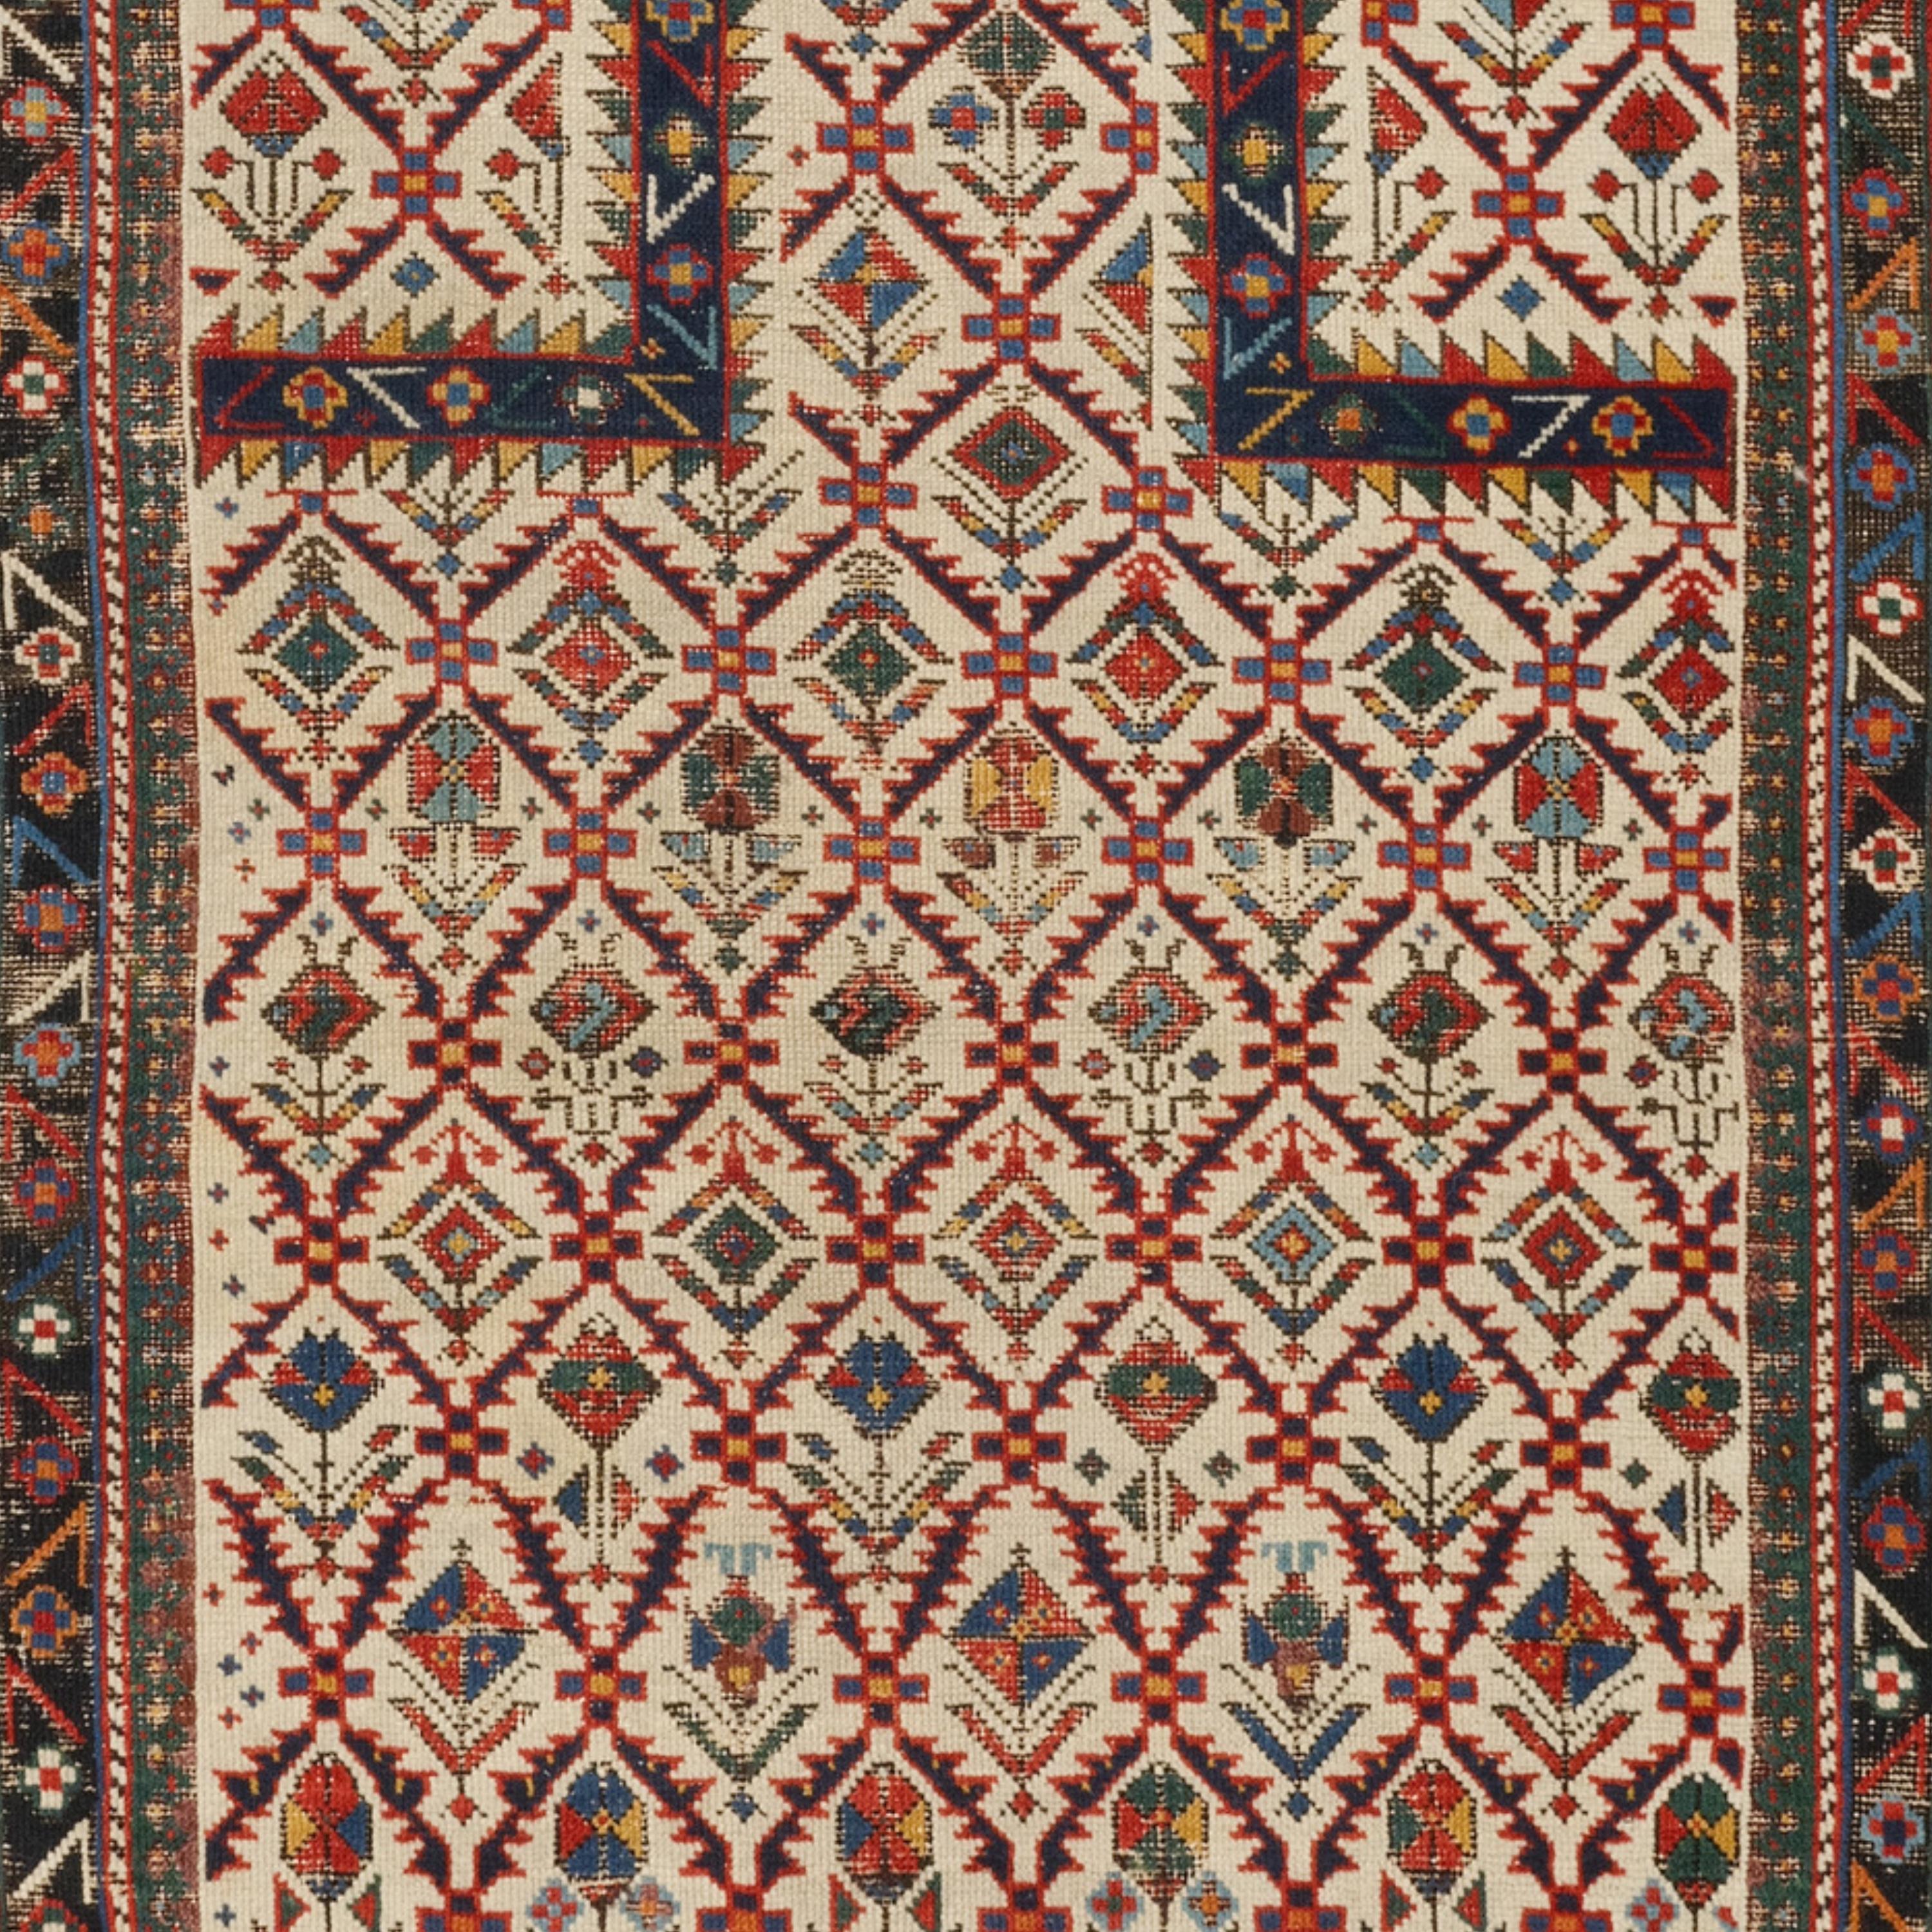 Caucasian Antique Shirvan Prayer Rug - Late of the 19th Century Shirvan Rug, Antique Rug For Sale